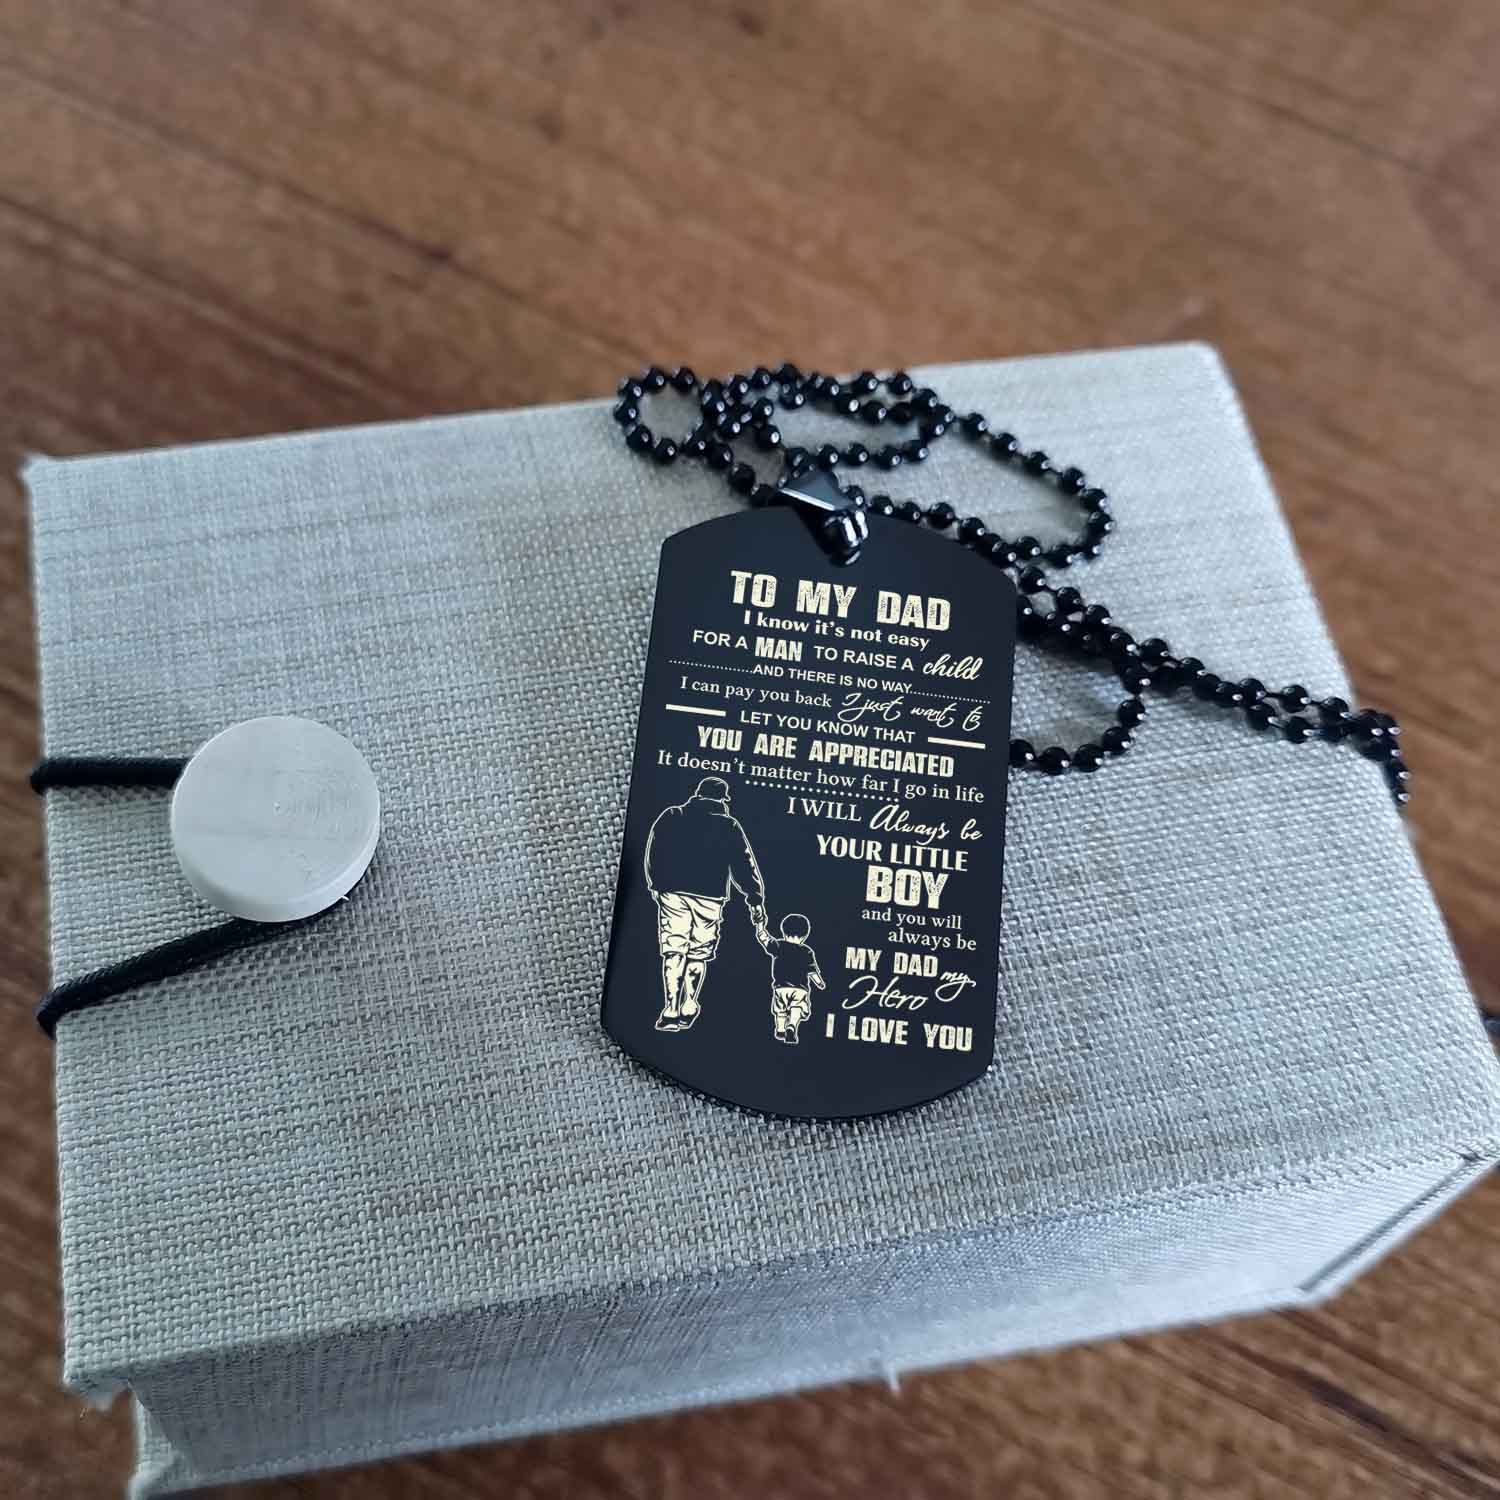 TM14 -To My Dad - I know it is not easy for a man to raise a child - Dad Son- - - Dog Tag Two Side- Dragon Ball - Viking-Dad Son- Family